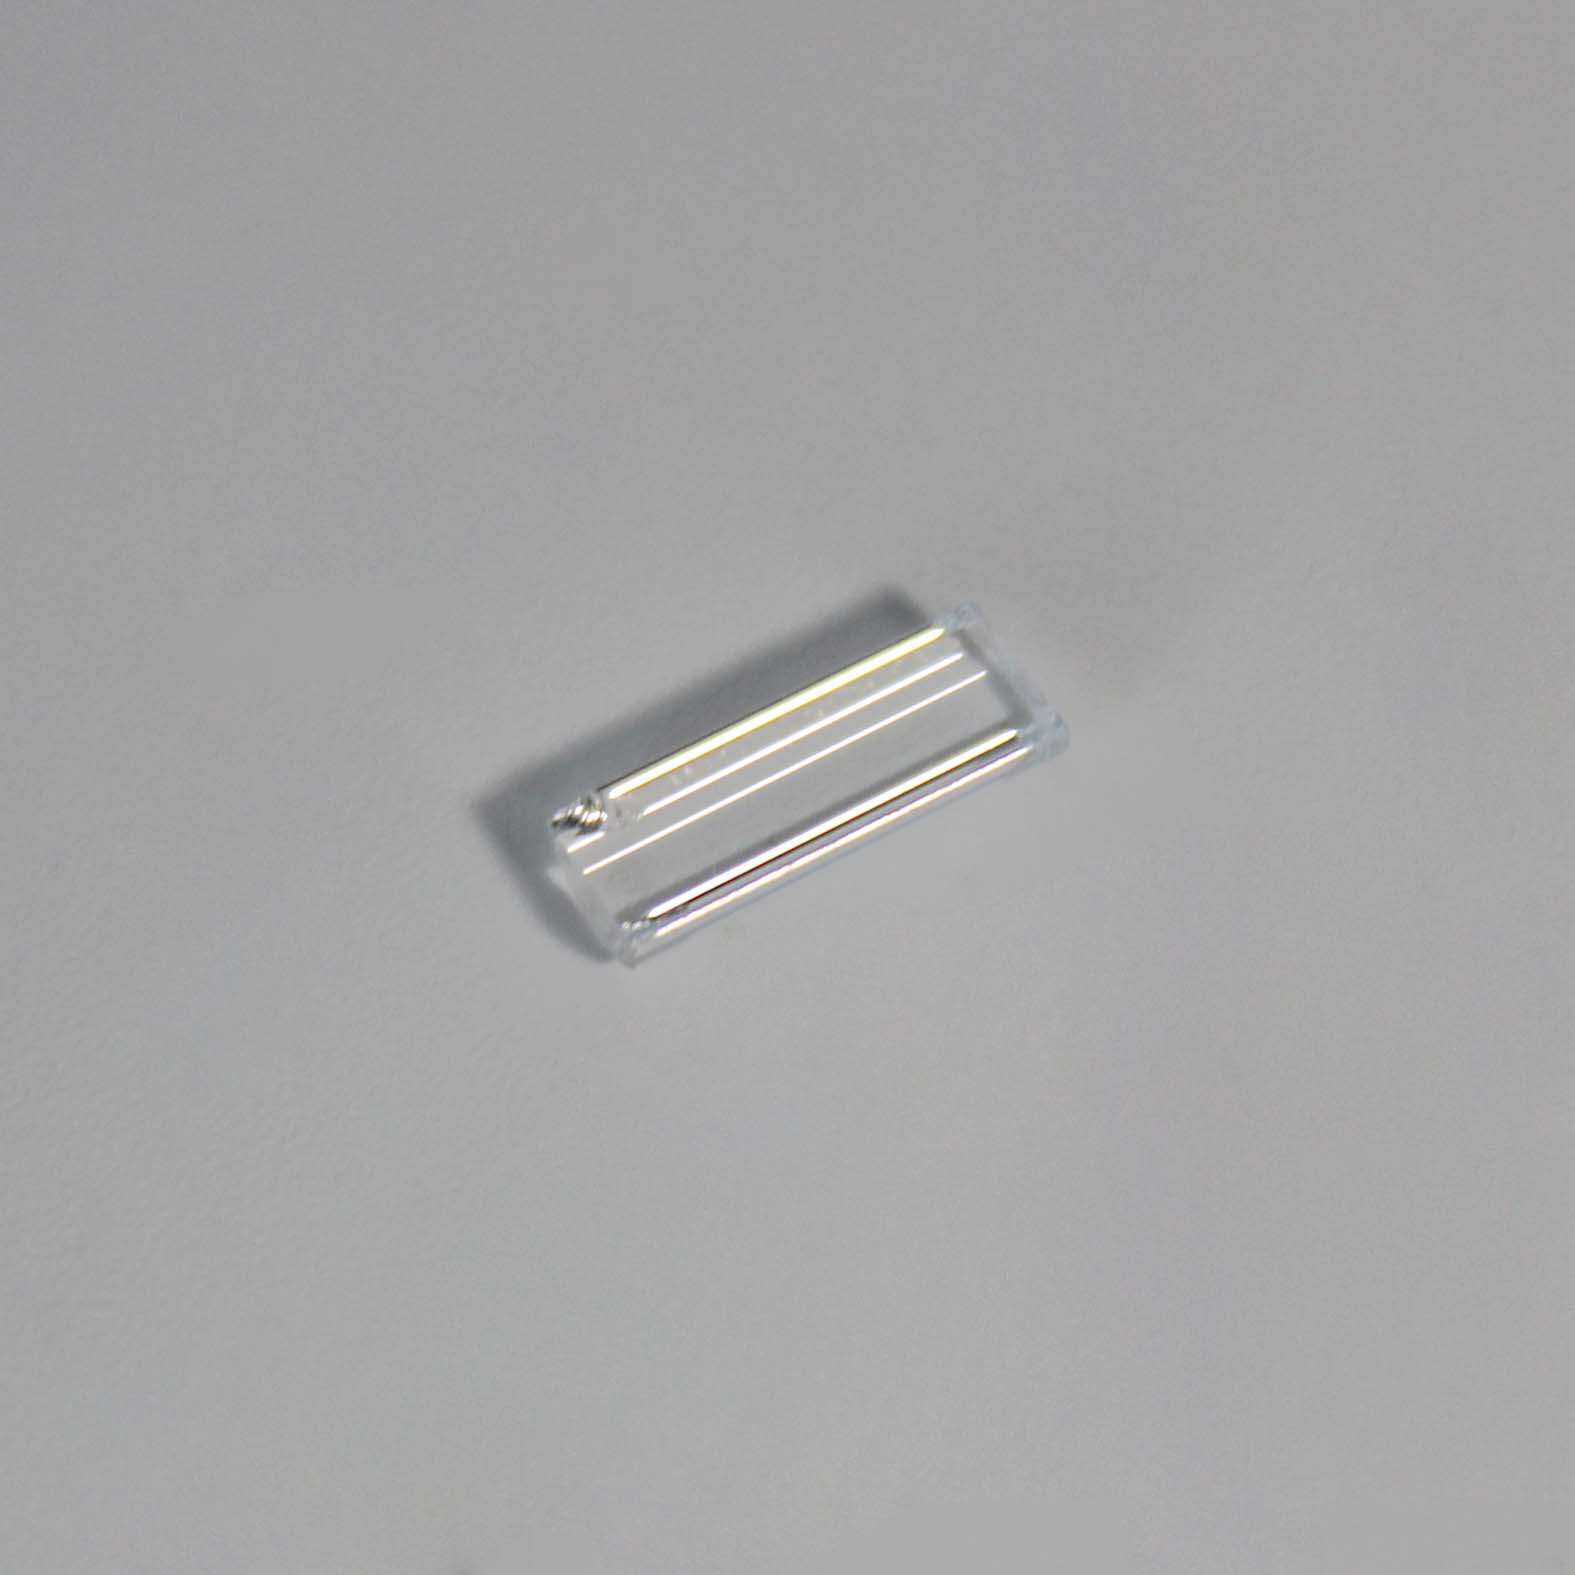 Optical Glass Fused Silica AR Coating Plano Convex Cylindrical Lens